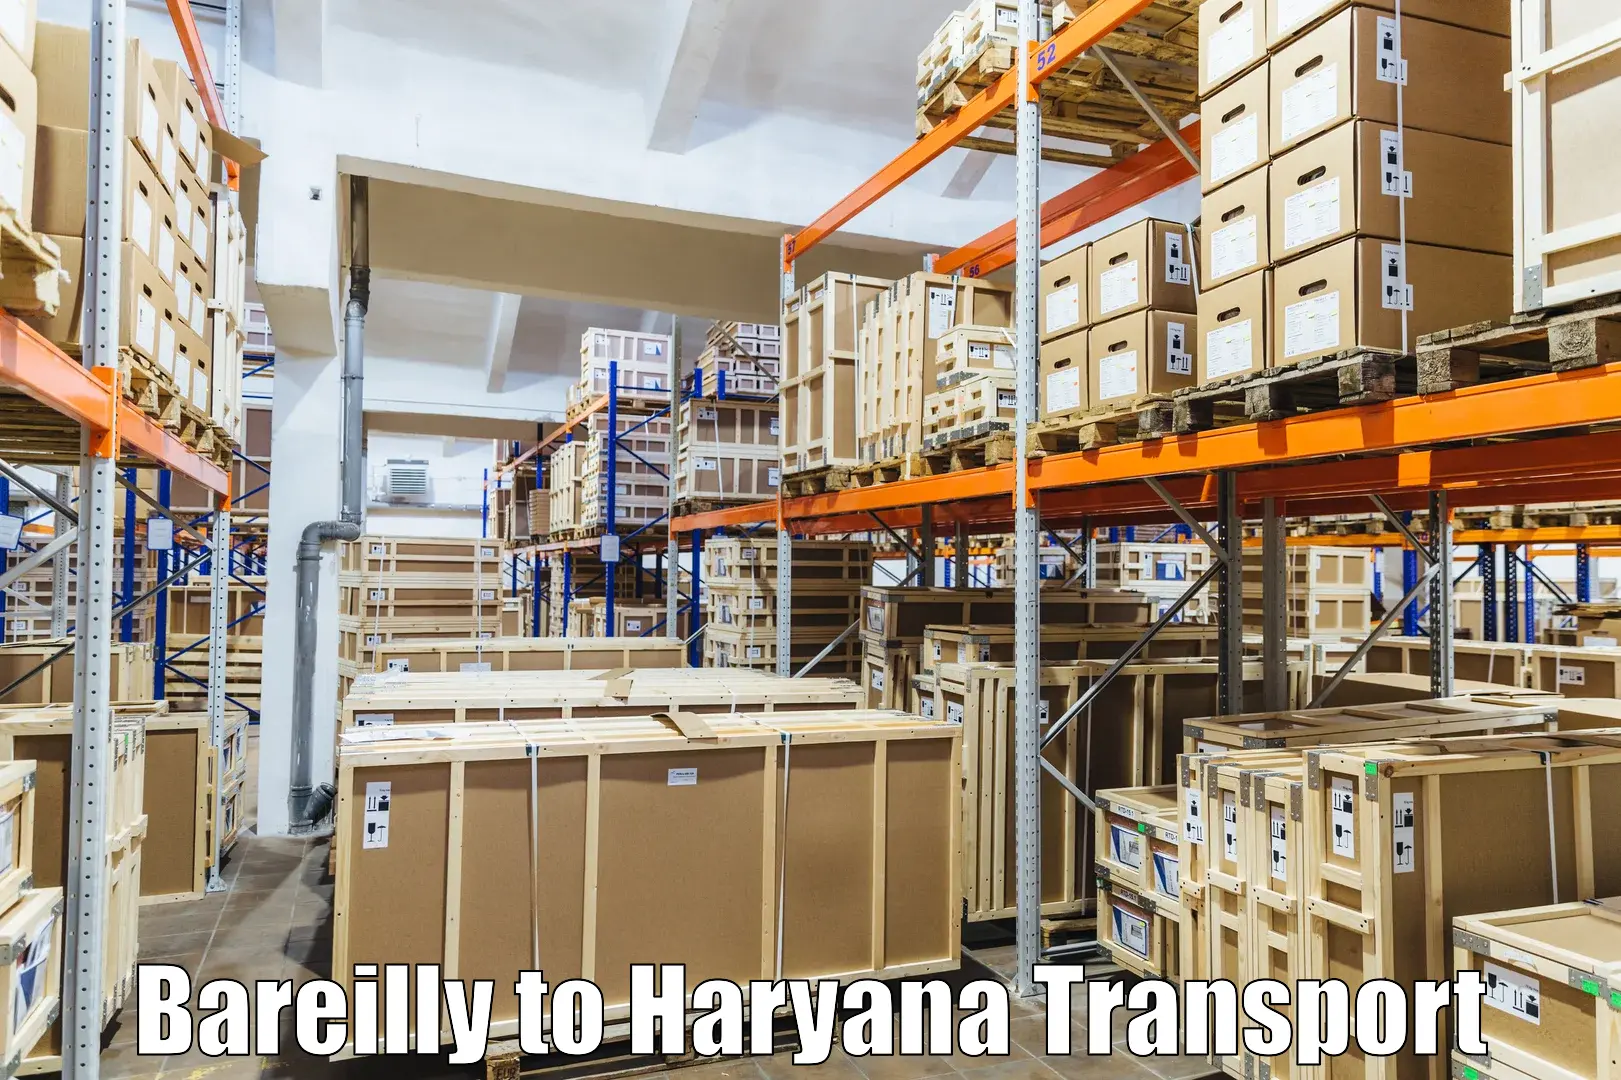 Vehicle parcel service Bareilly to NCR Haryana